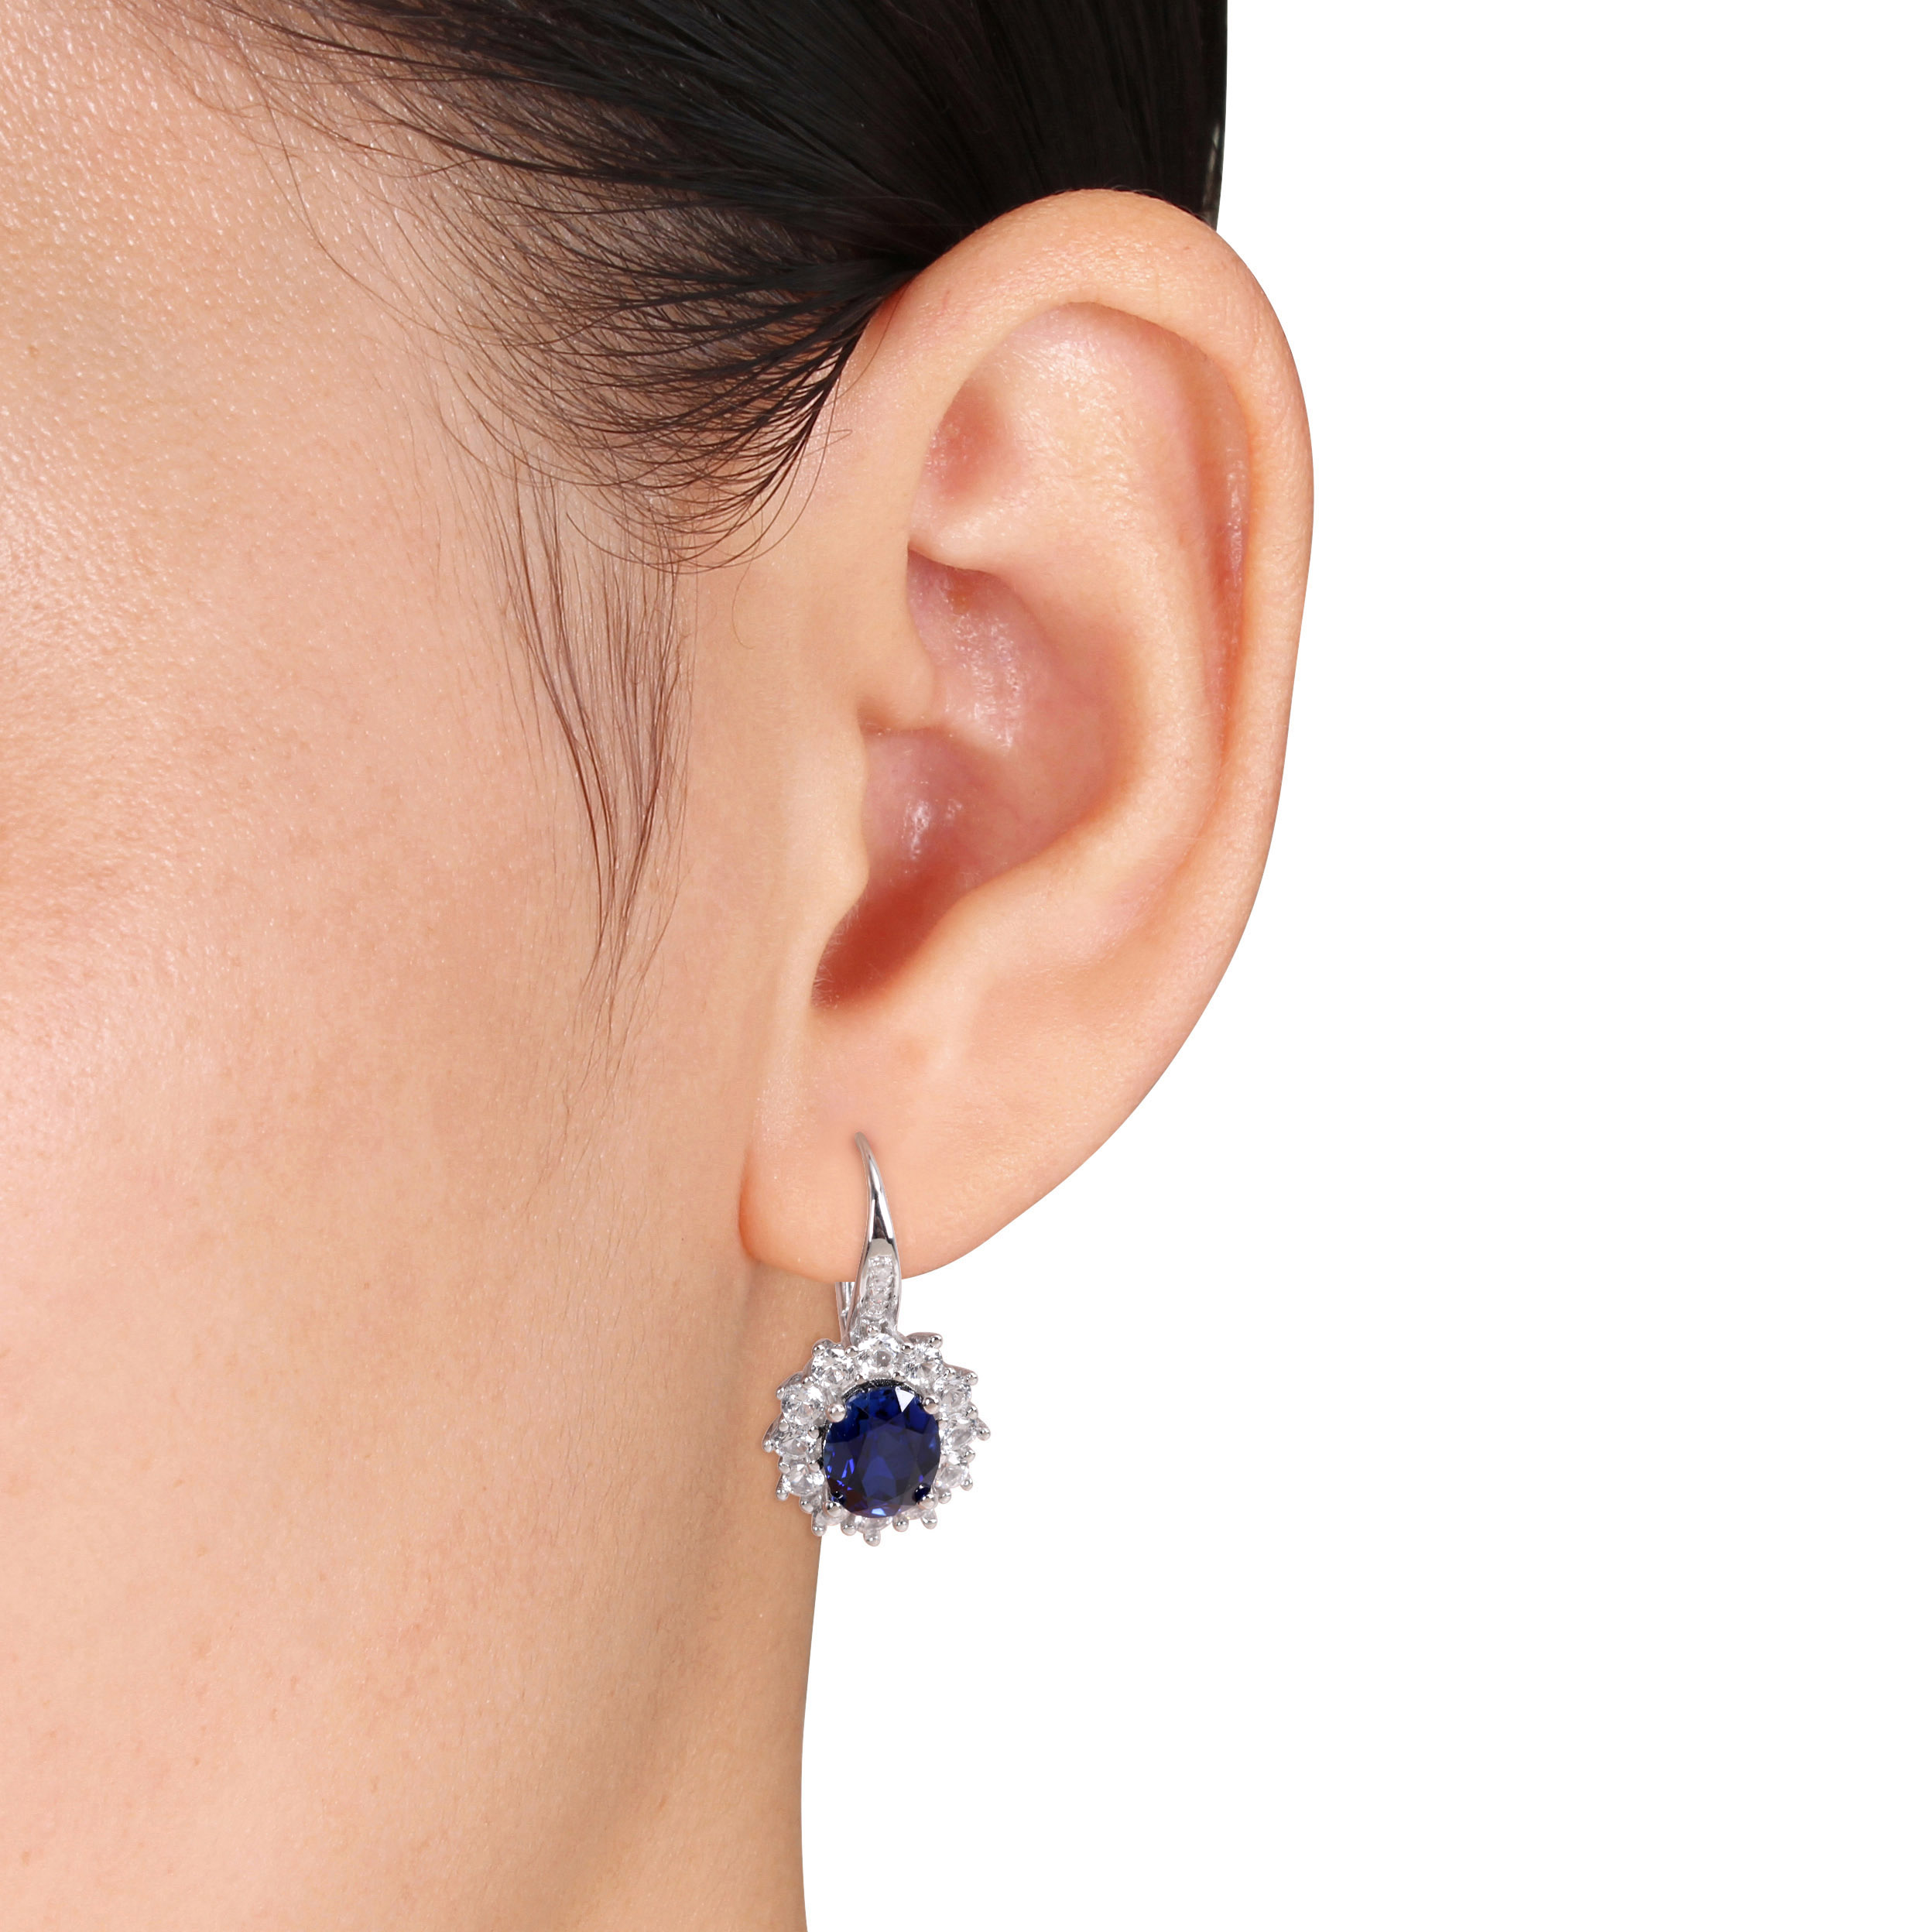 8.06 CT TGW Created Blue and White Sapphire and Diamond Halo Leverback Earrings in Sterling Silver